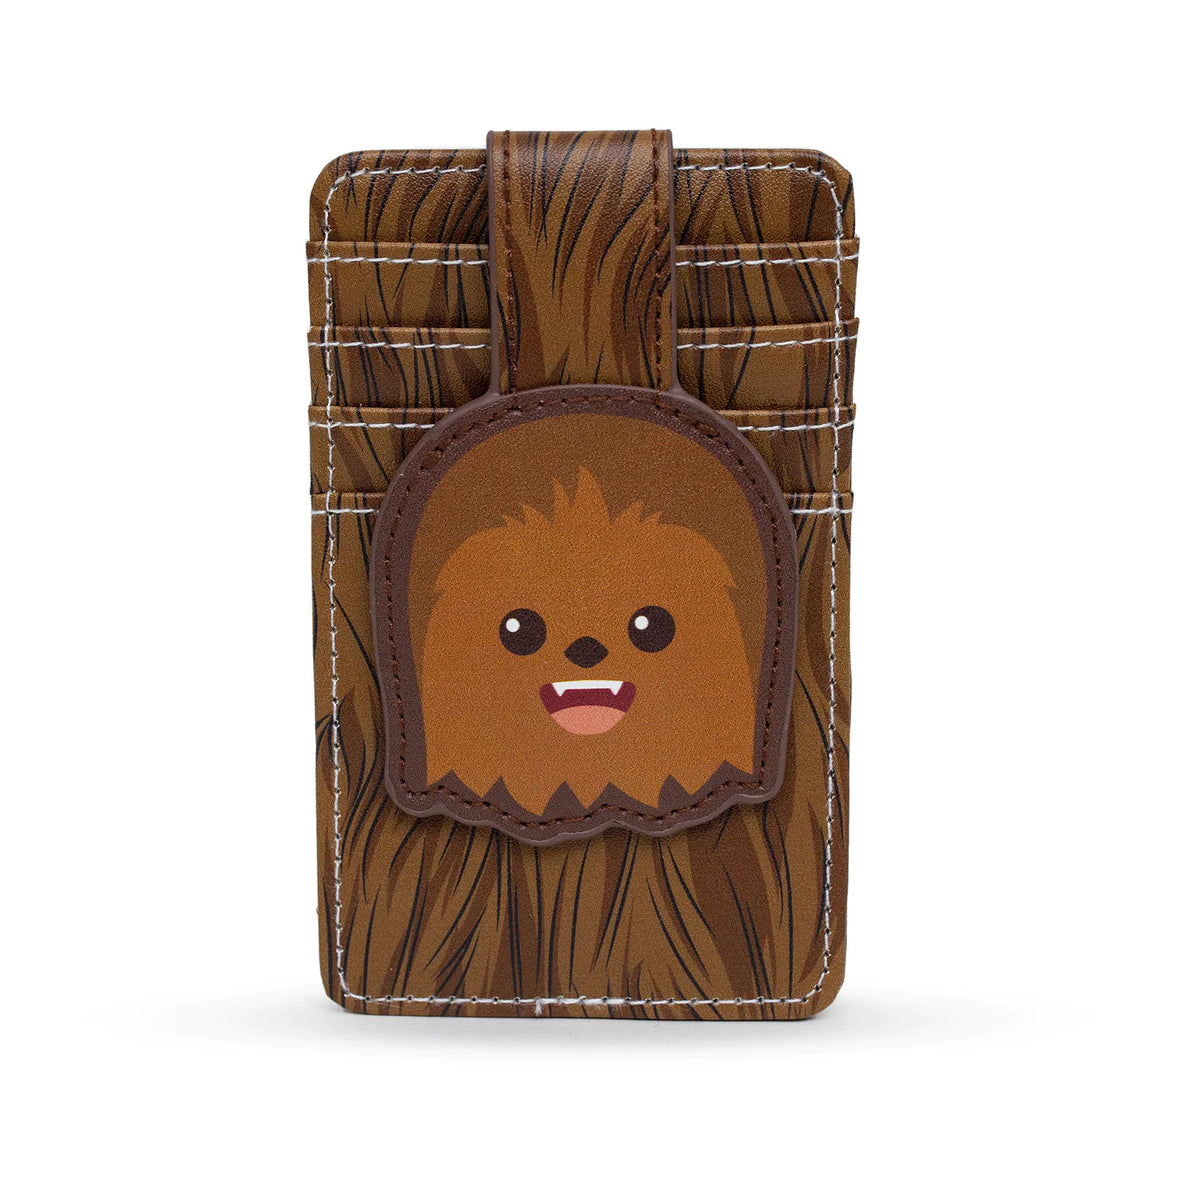 Star Wars Wallet, Character Wallet ID Card Holder, Star Wars Chewbacca Expression Browns, Vegan Leather